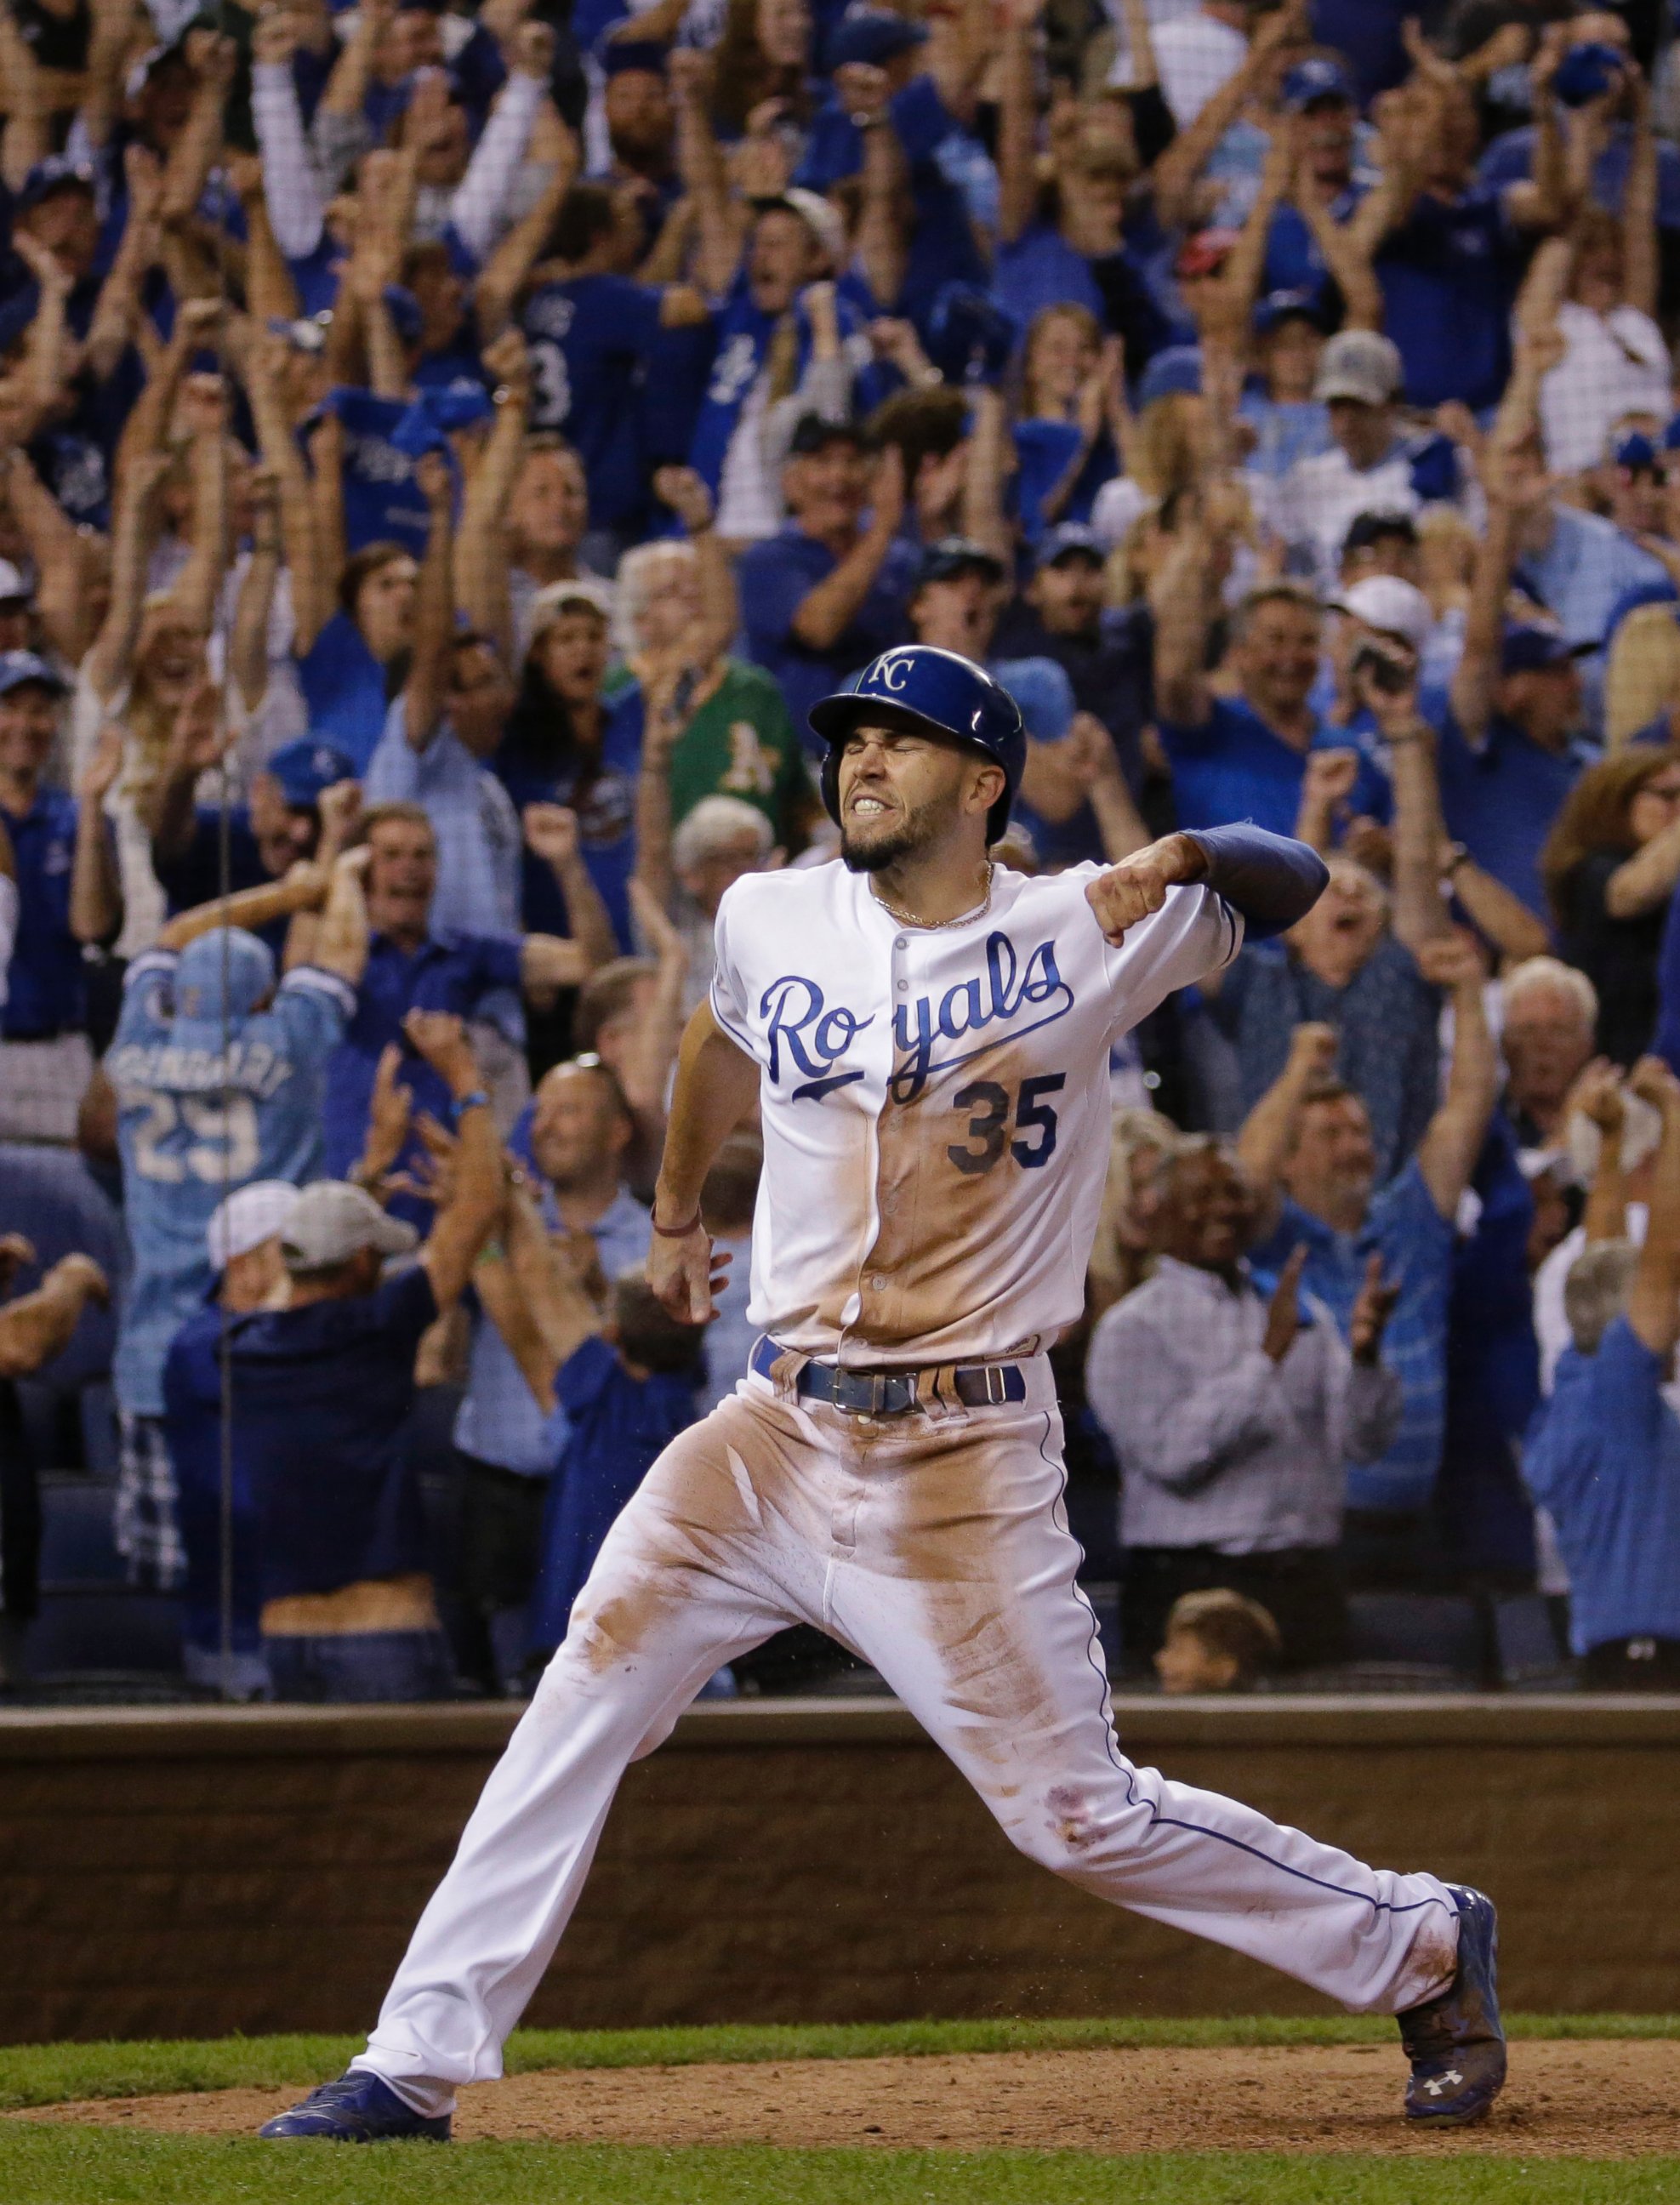 PHOTO: Kansas City Royals' Eric Hosmer celebrates after scoring on a single by Christian Colon during the 12th inning of the AL wild-card playoff baseball game against the Oakland Athletics, Sept. 30, 2014, in Kansas City, Mo.